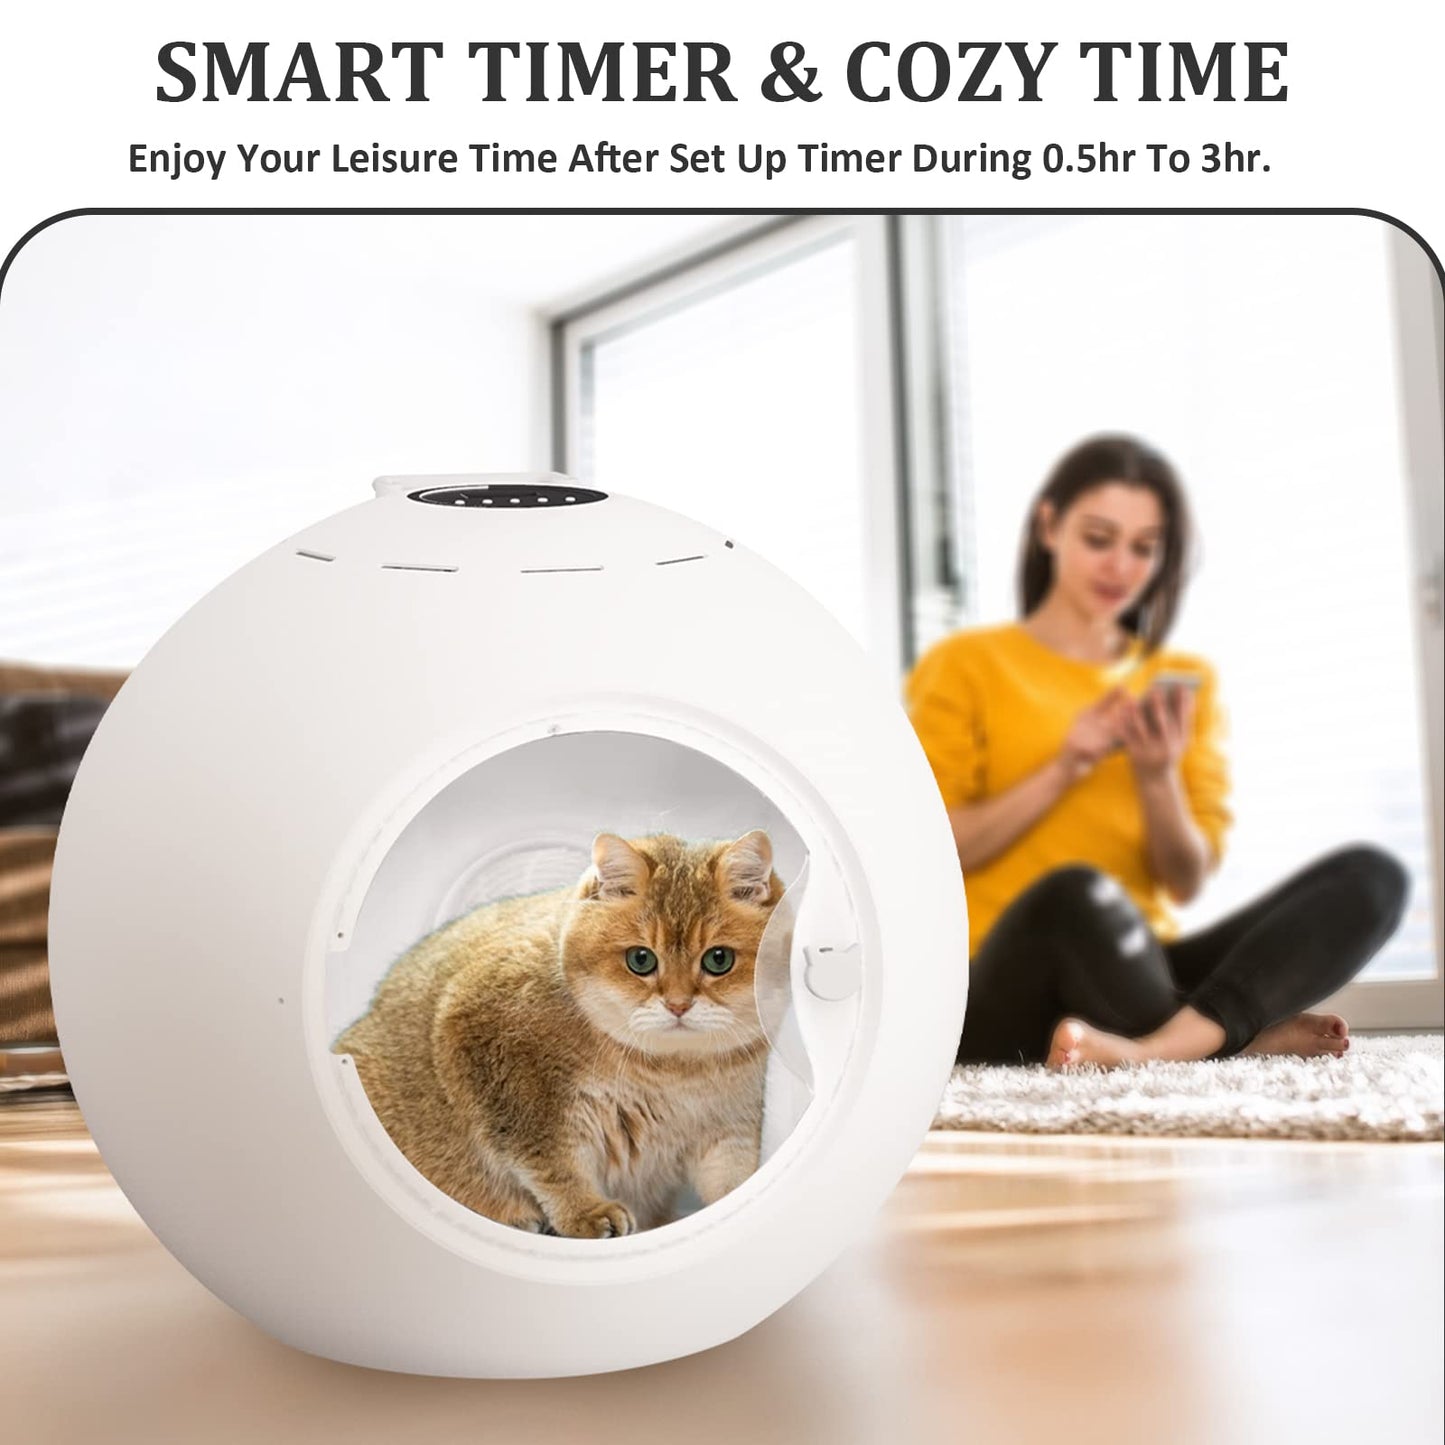 Smart timer & cozy time | Pet Dryer for Cats and Small Dog